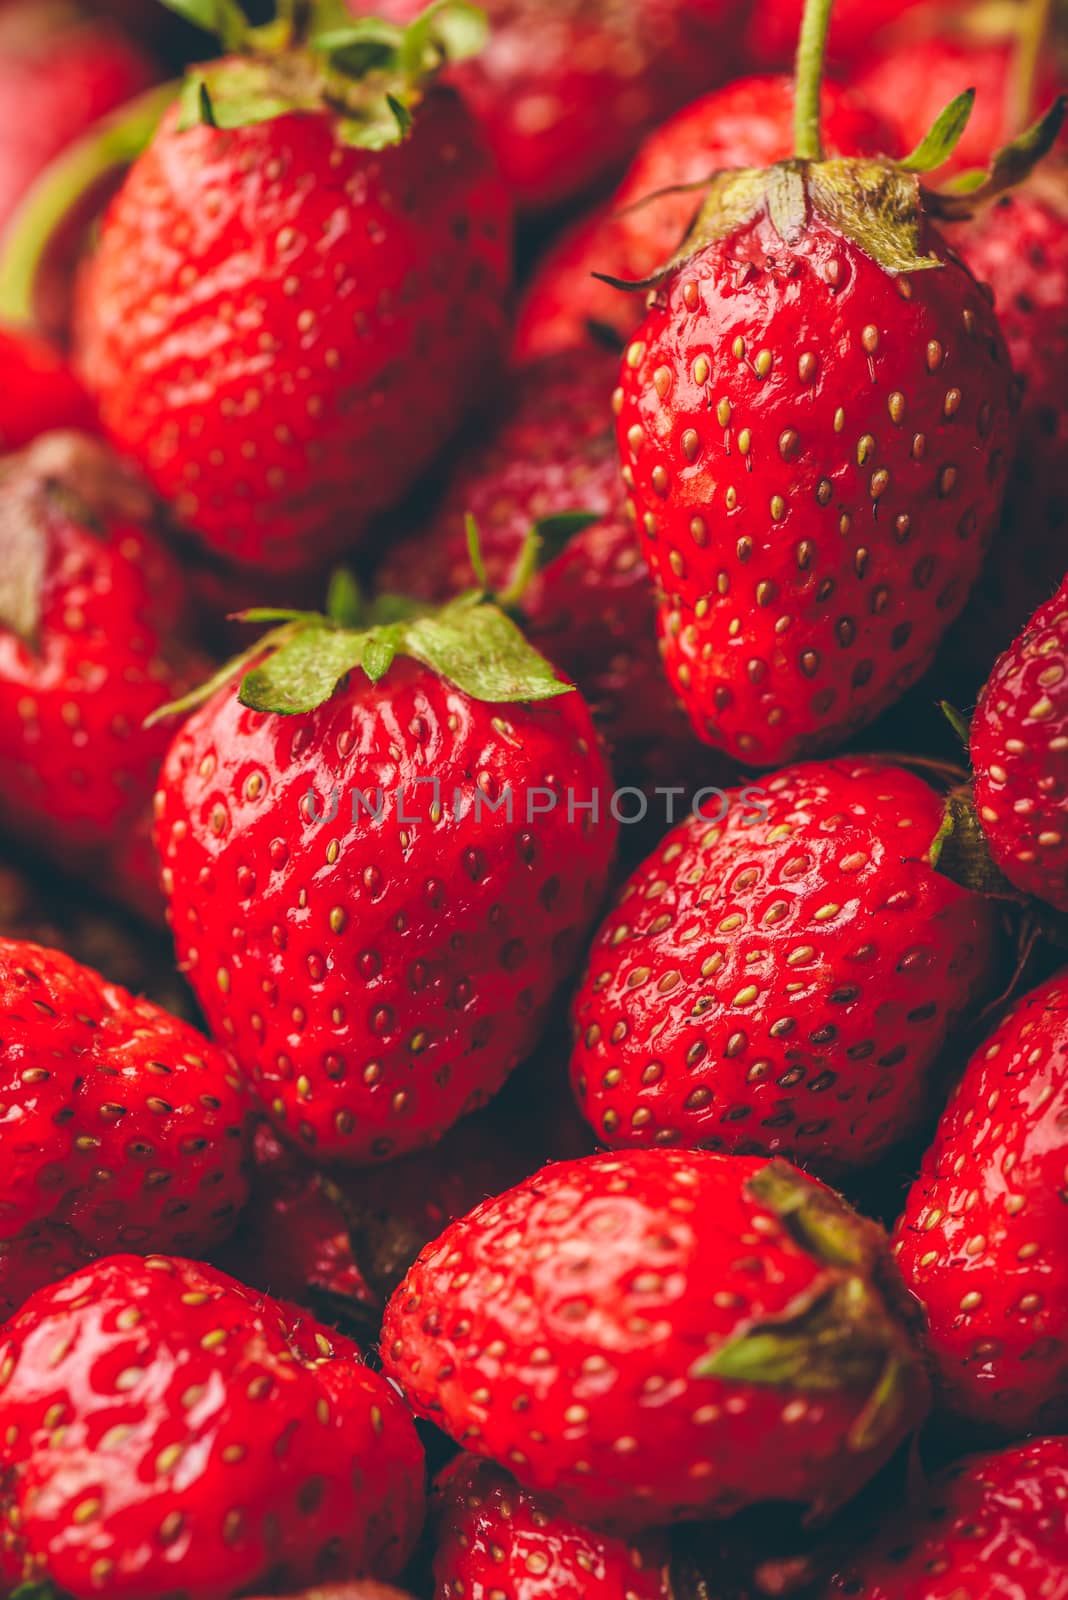 Background of Ripe and Fresh Strawberries. Selective Focus.